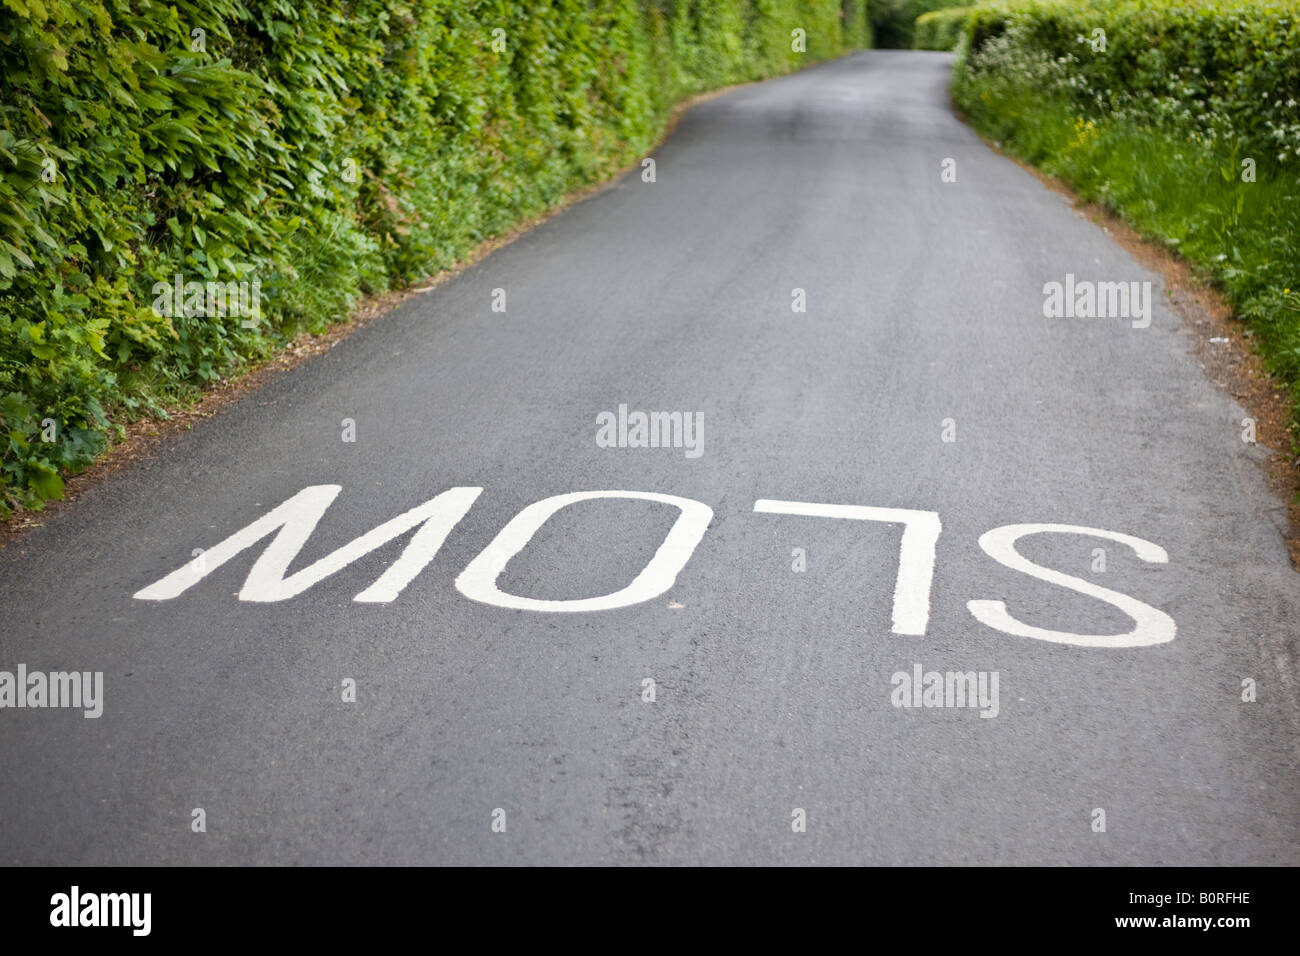 Country road with Slow markings.  Shallow depth of field gives almost 3d effect. Stock Photo